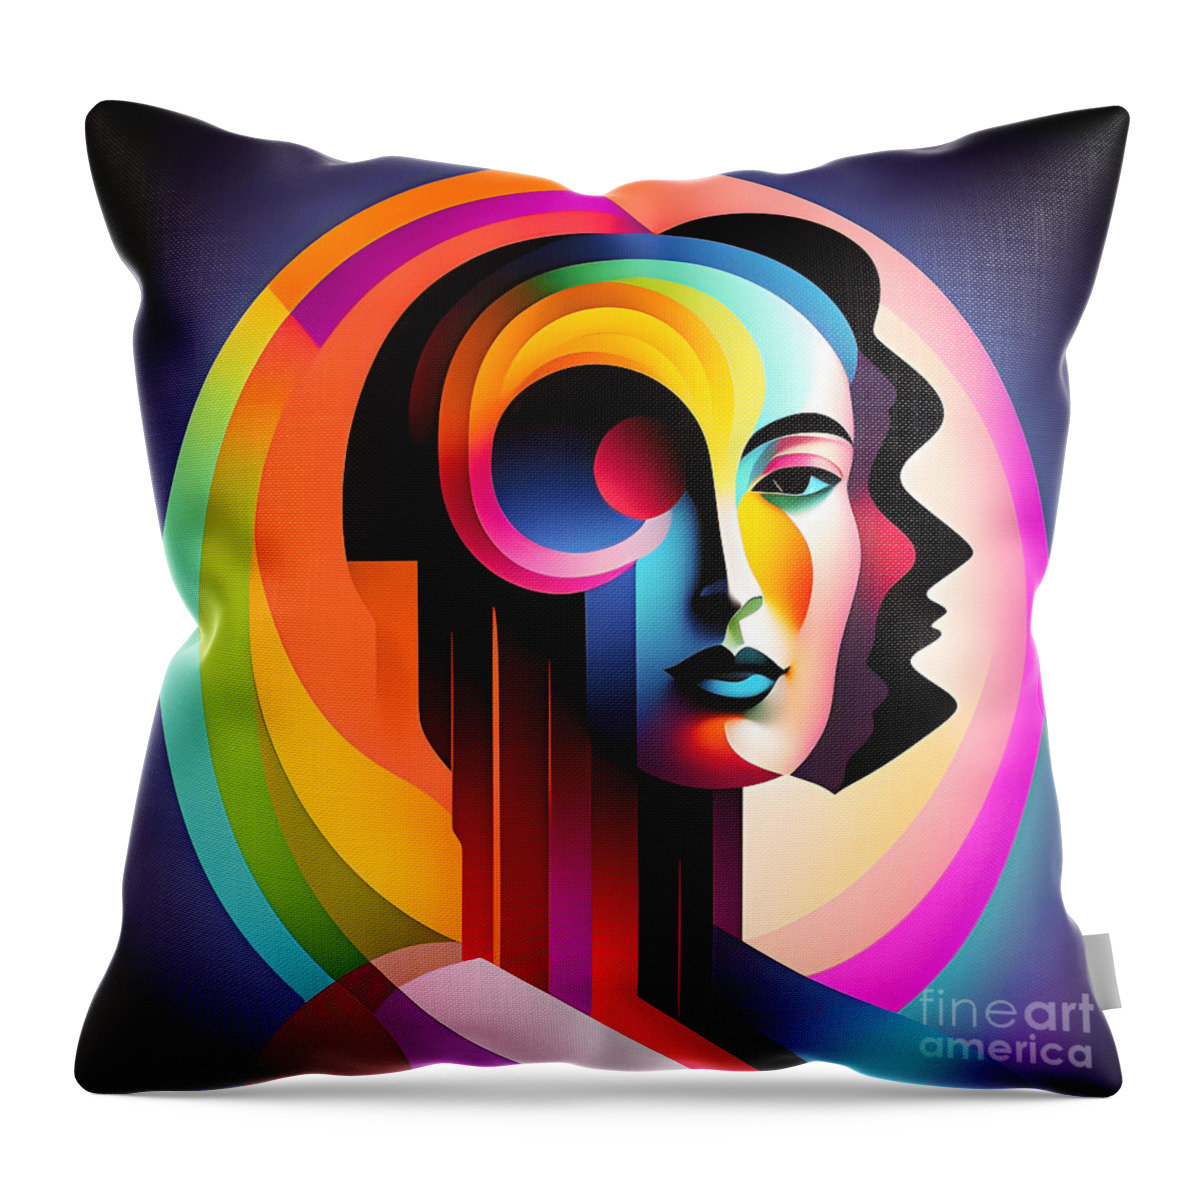 Portrait Throw Pillow featuring the digital art Colourful Abstract Surreal Portrait - 3 by Philip Preston